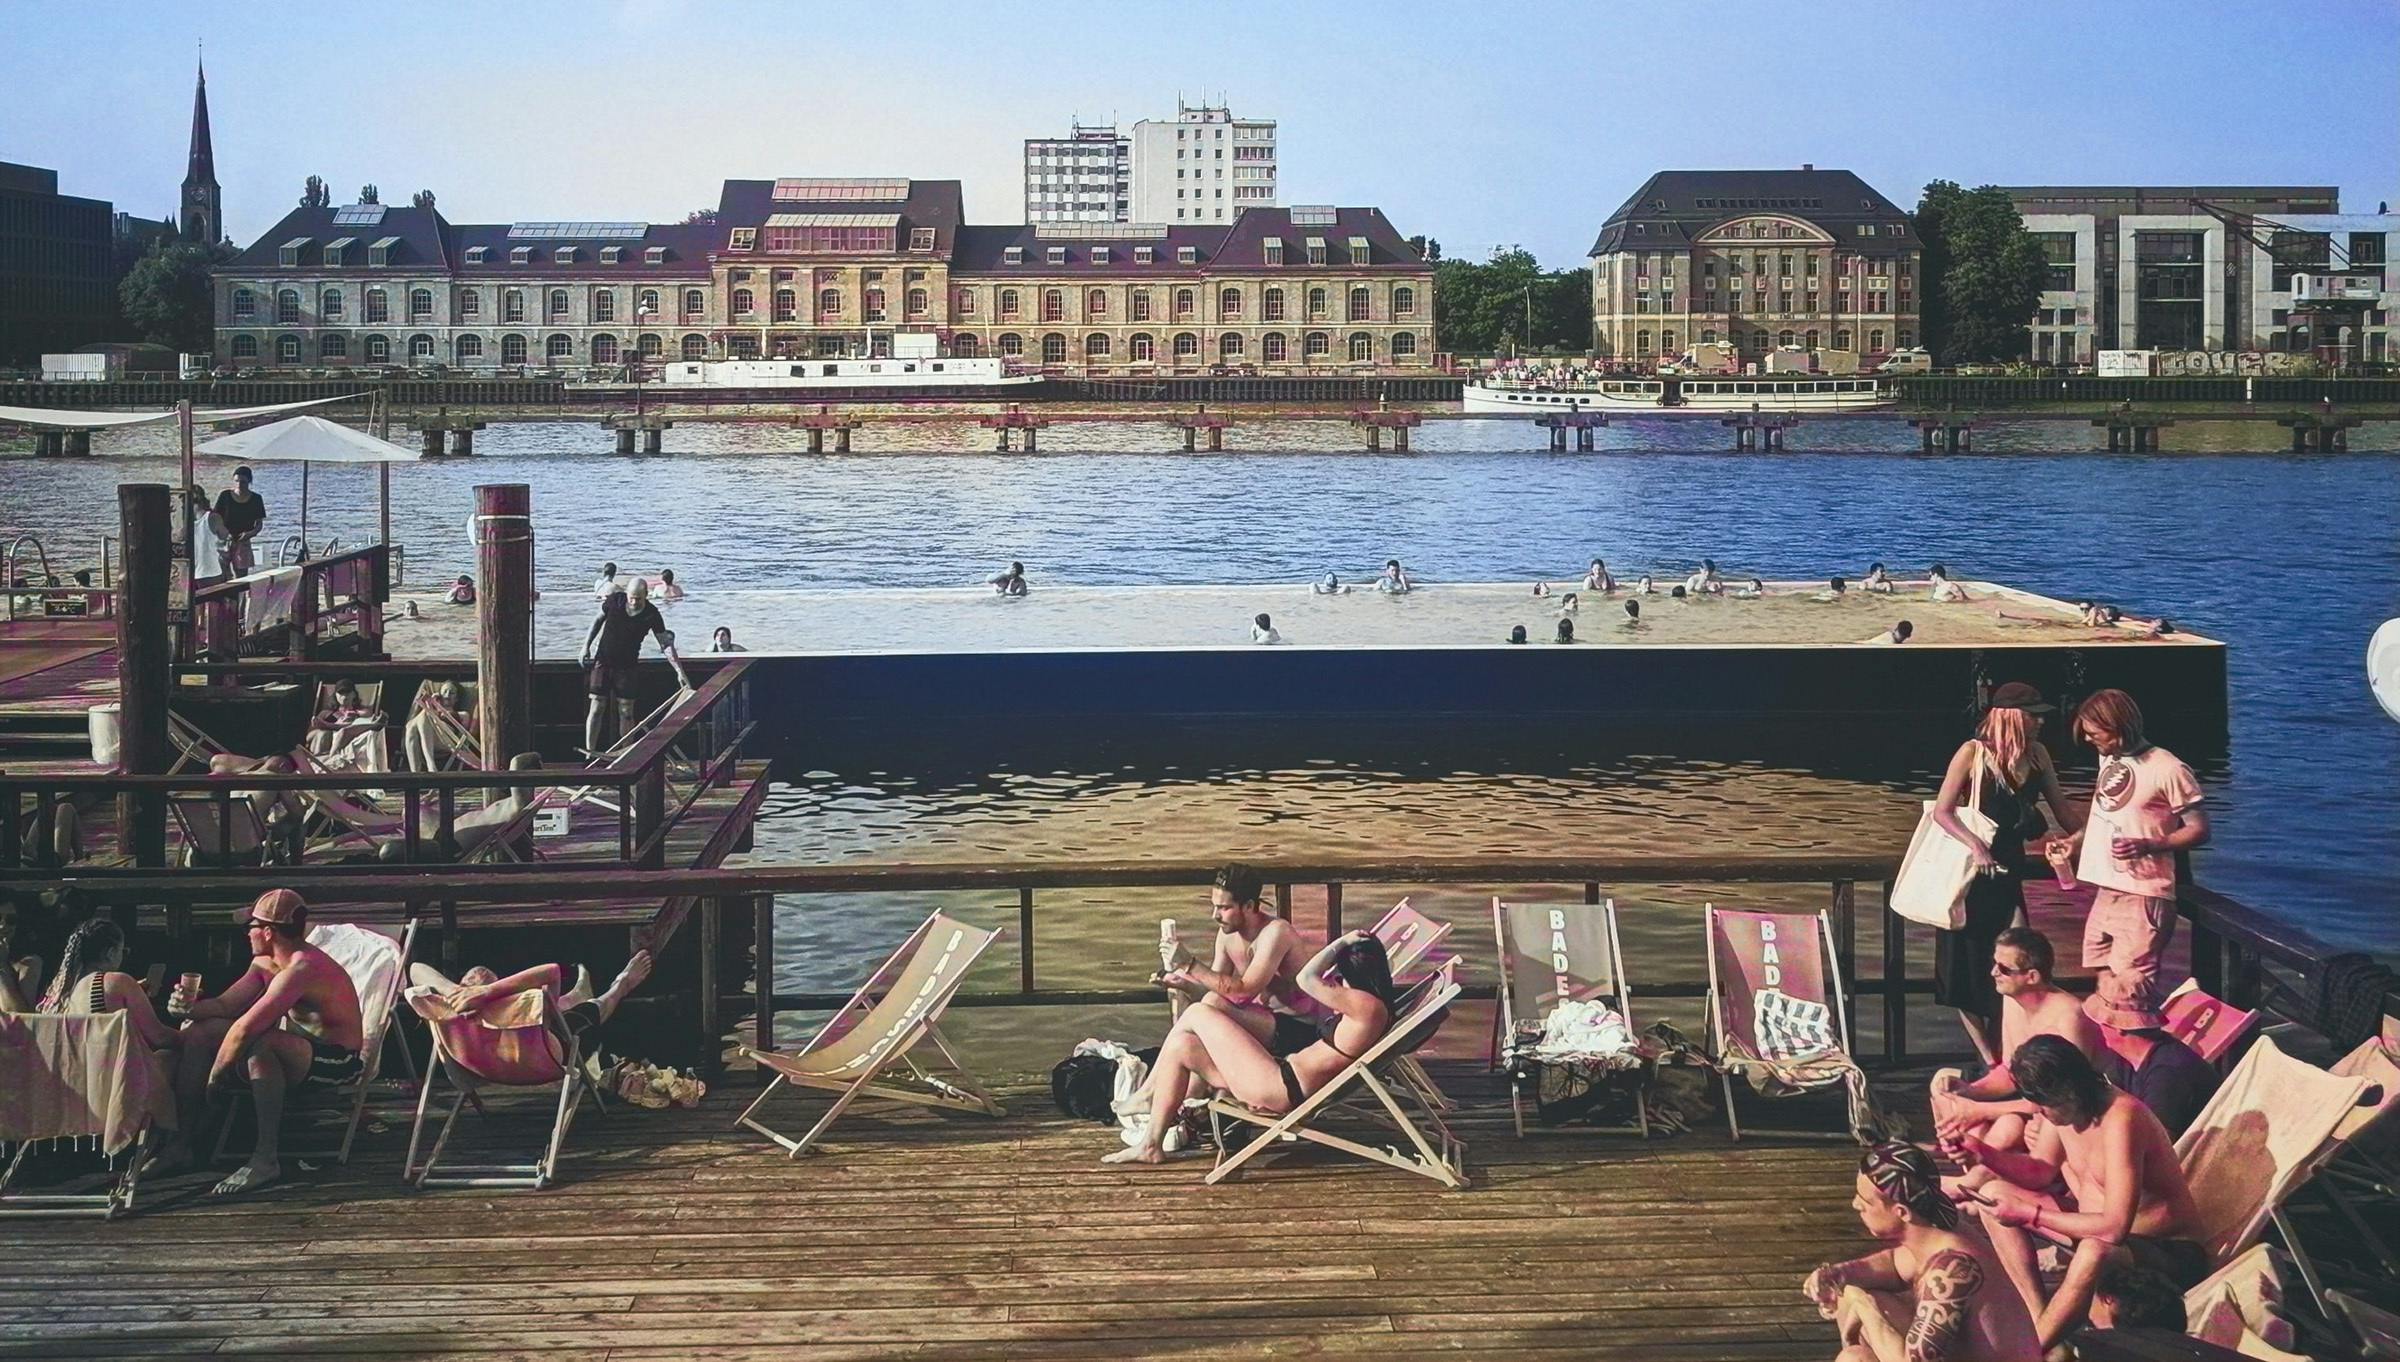 Photo of people lounging at the waterfront in Germany